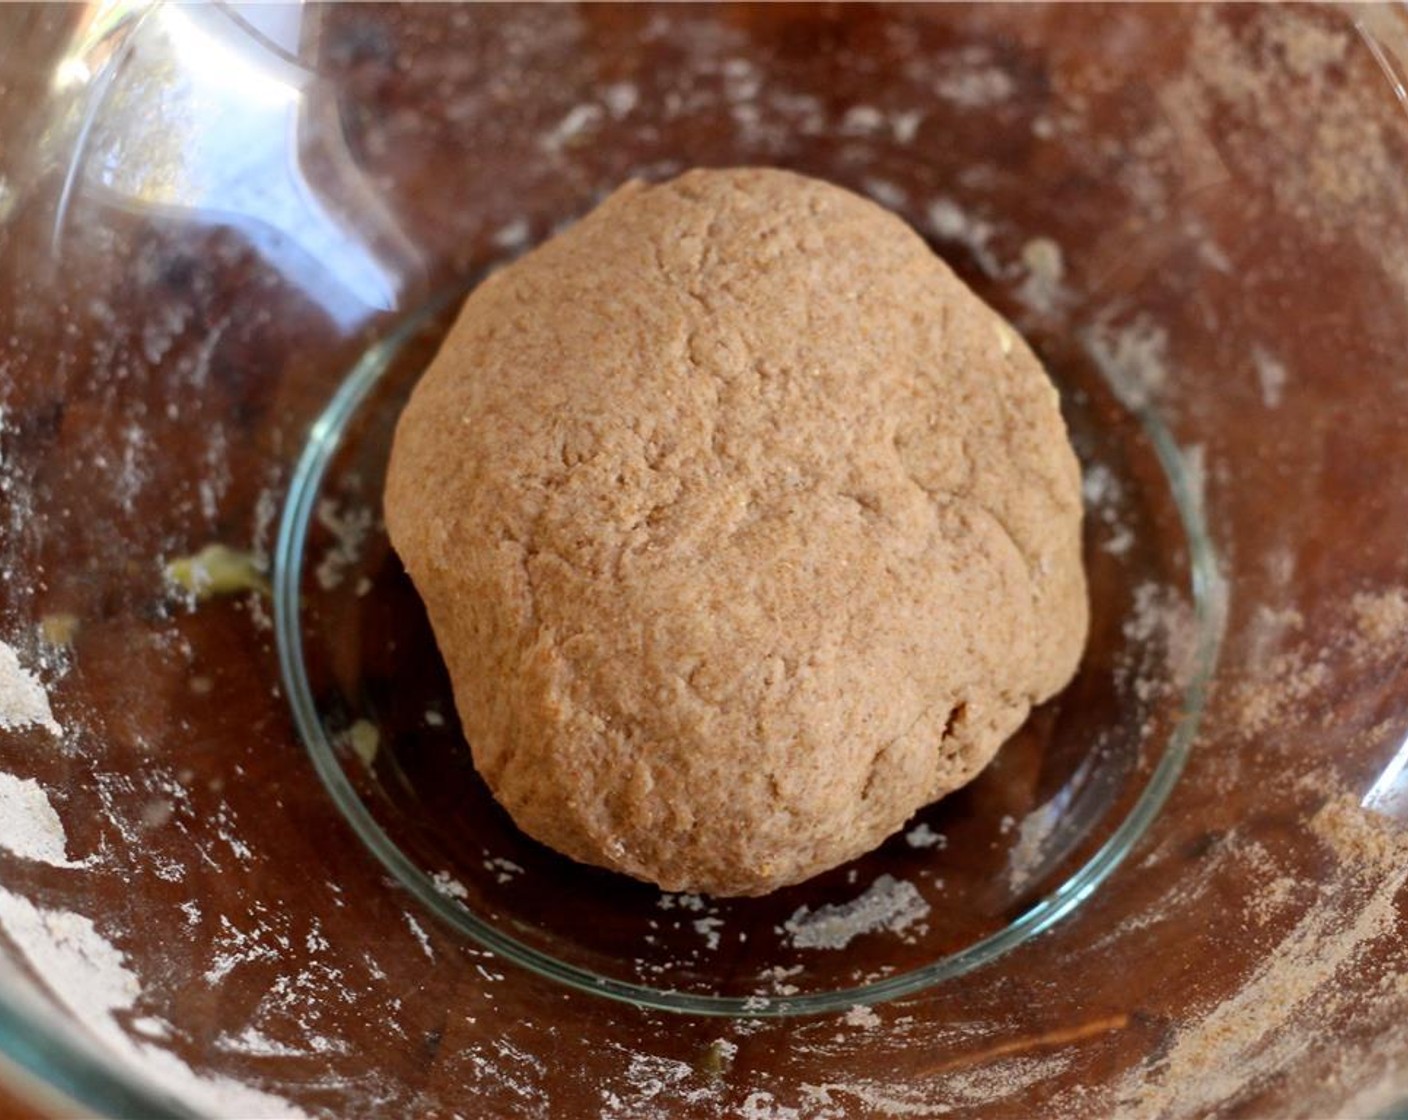 step 8 For the roti, in a small bowl, mix together the Whole Wheat Flour (2 cups), Water (1 cup), and Salt (1 tsp) using one clean hand. It should form a fairly moist dough. Knead until smooth and form into a ball.  Cover with a damp towel or paper towel. Set aside for 10 minutes.